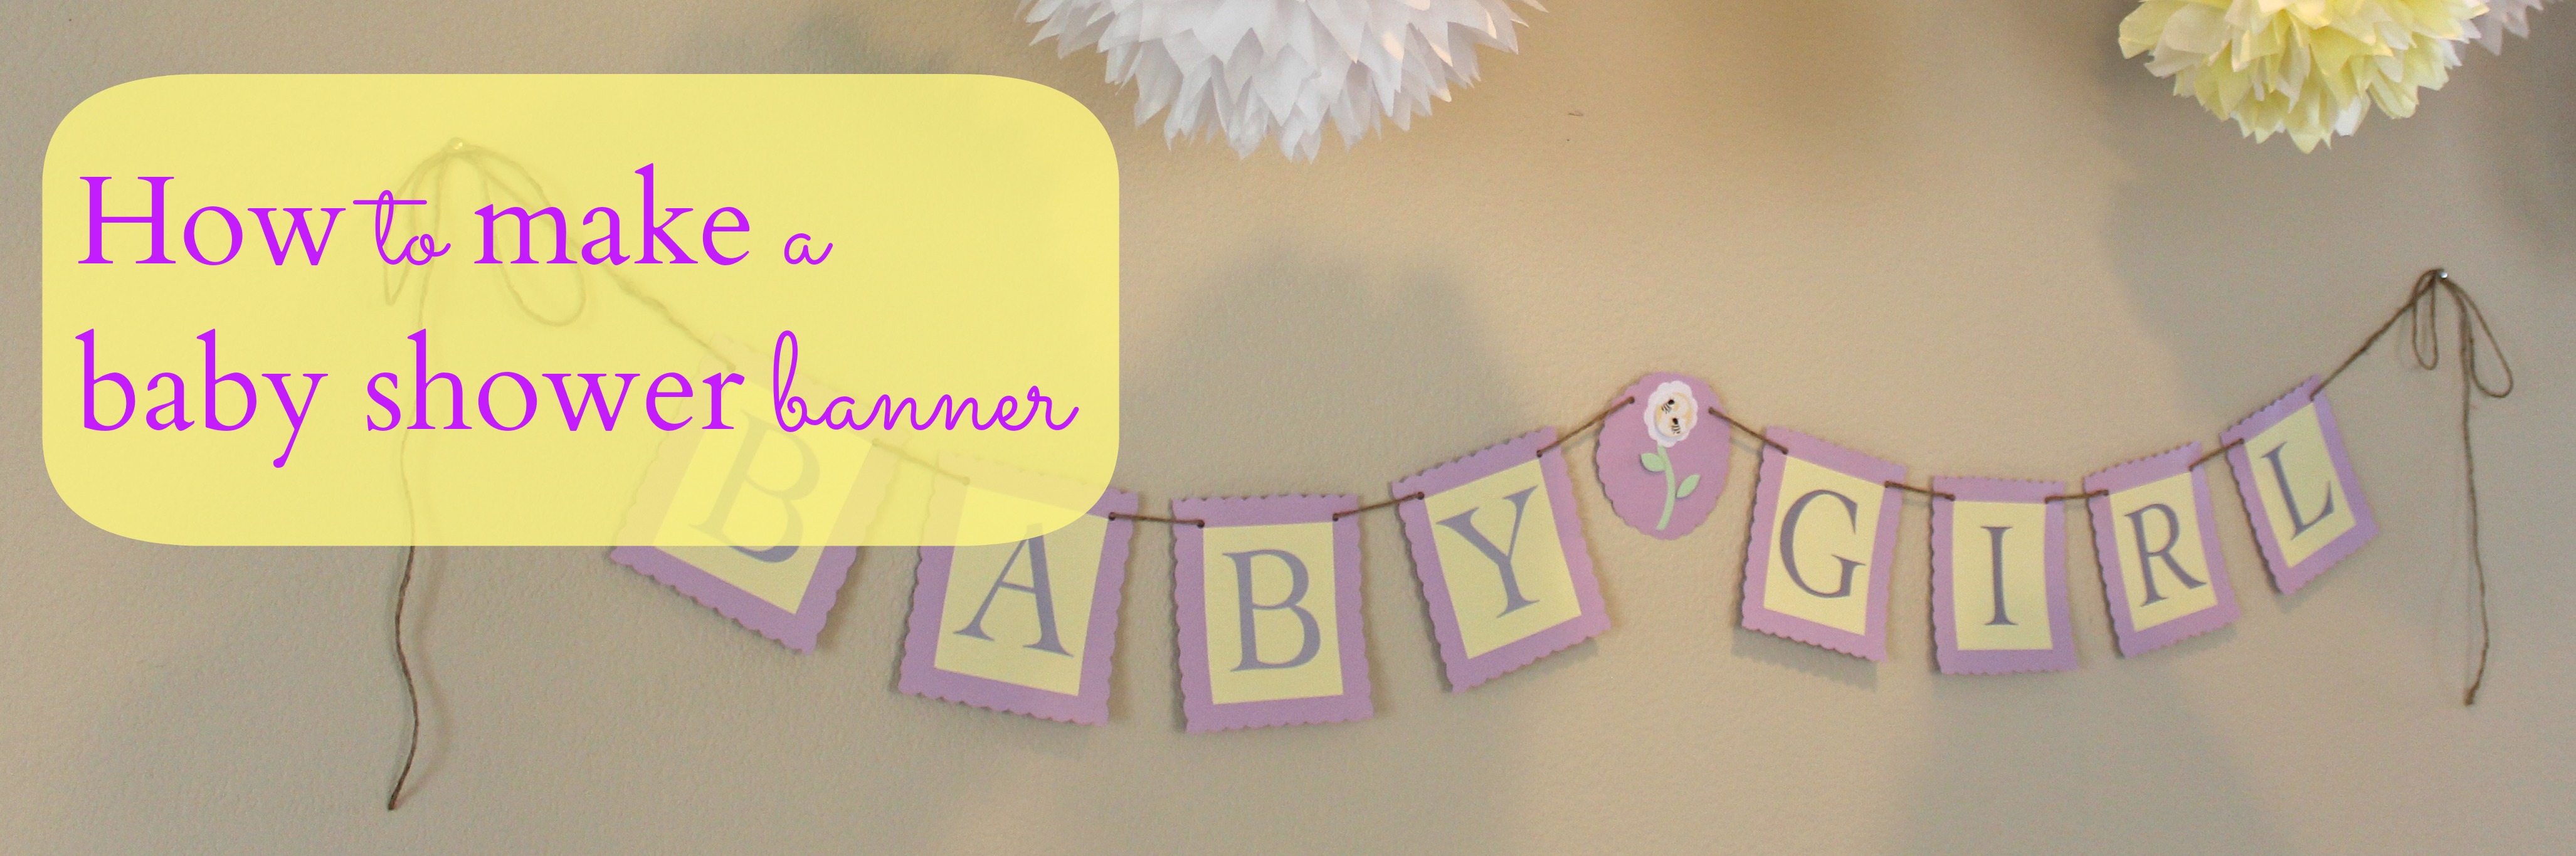 Full Size of Baby Shower:89+ Indulging Baby Shower Banner Picture Inspirations Baby Shower Banner Un Baby Shower Baby Shower Desserts Baby Shower Food Fiesta De Baby Shower My Baby Shower More Baby Shower Stuff The Silberez Life